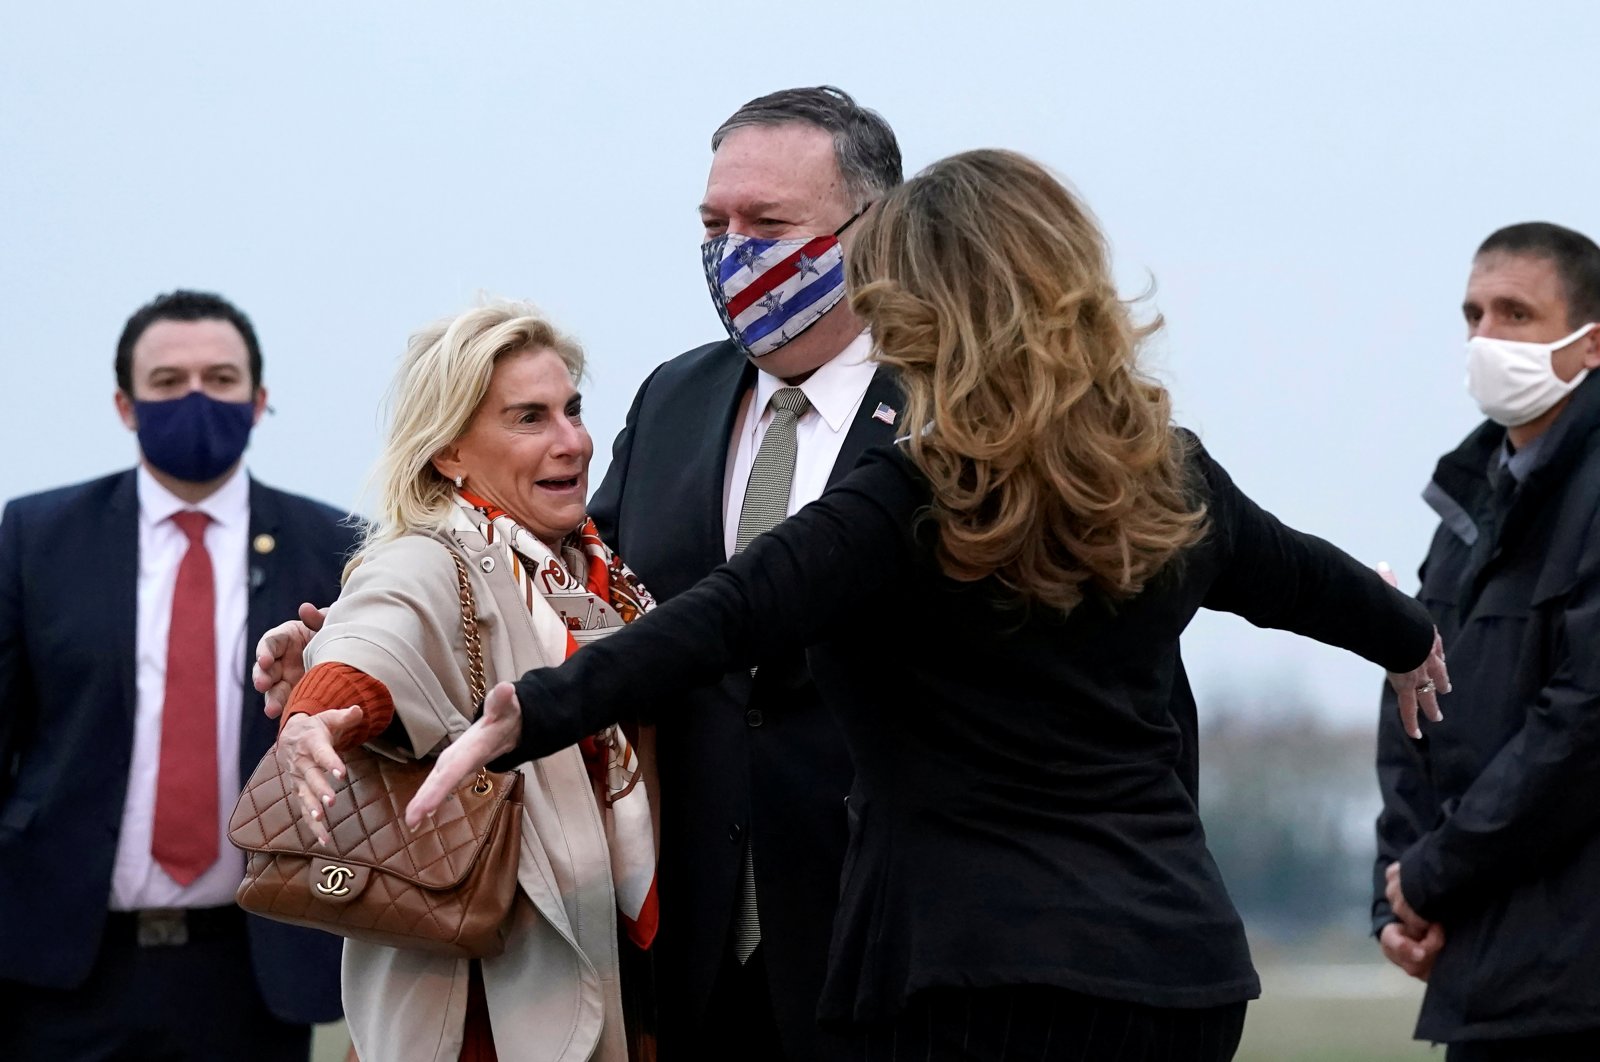 U.S. Secretary of State Mike Pompeo and his wife Susan embrace U.S. Ambassador to France Jamie McCourt after stepping off a plane at Paris-Le Bourget Airport, in Le Bourget, France  Nov. 14, 2020. (REUTERS)